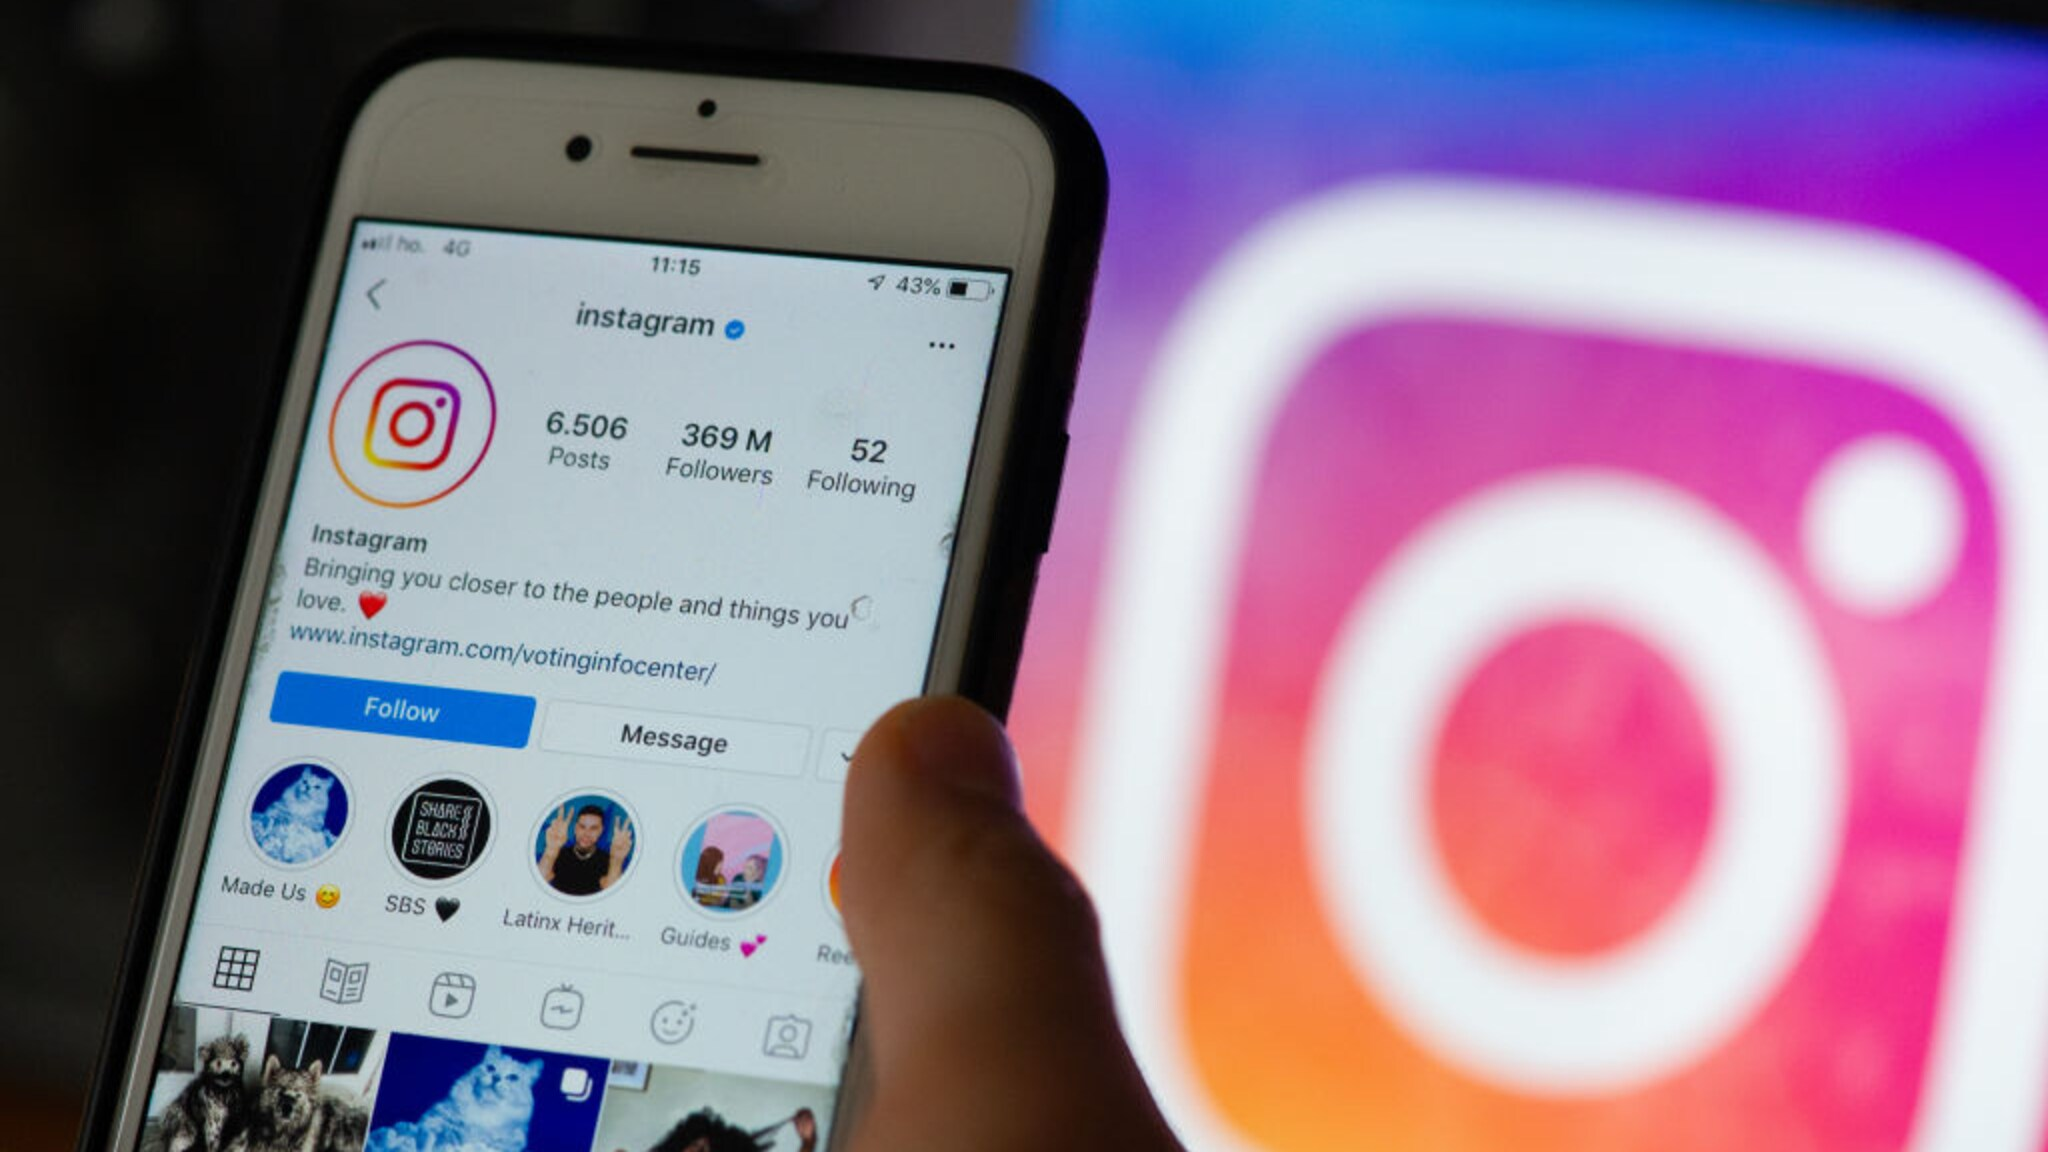 How to become an influencer on Instagram?